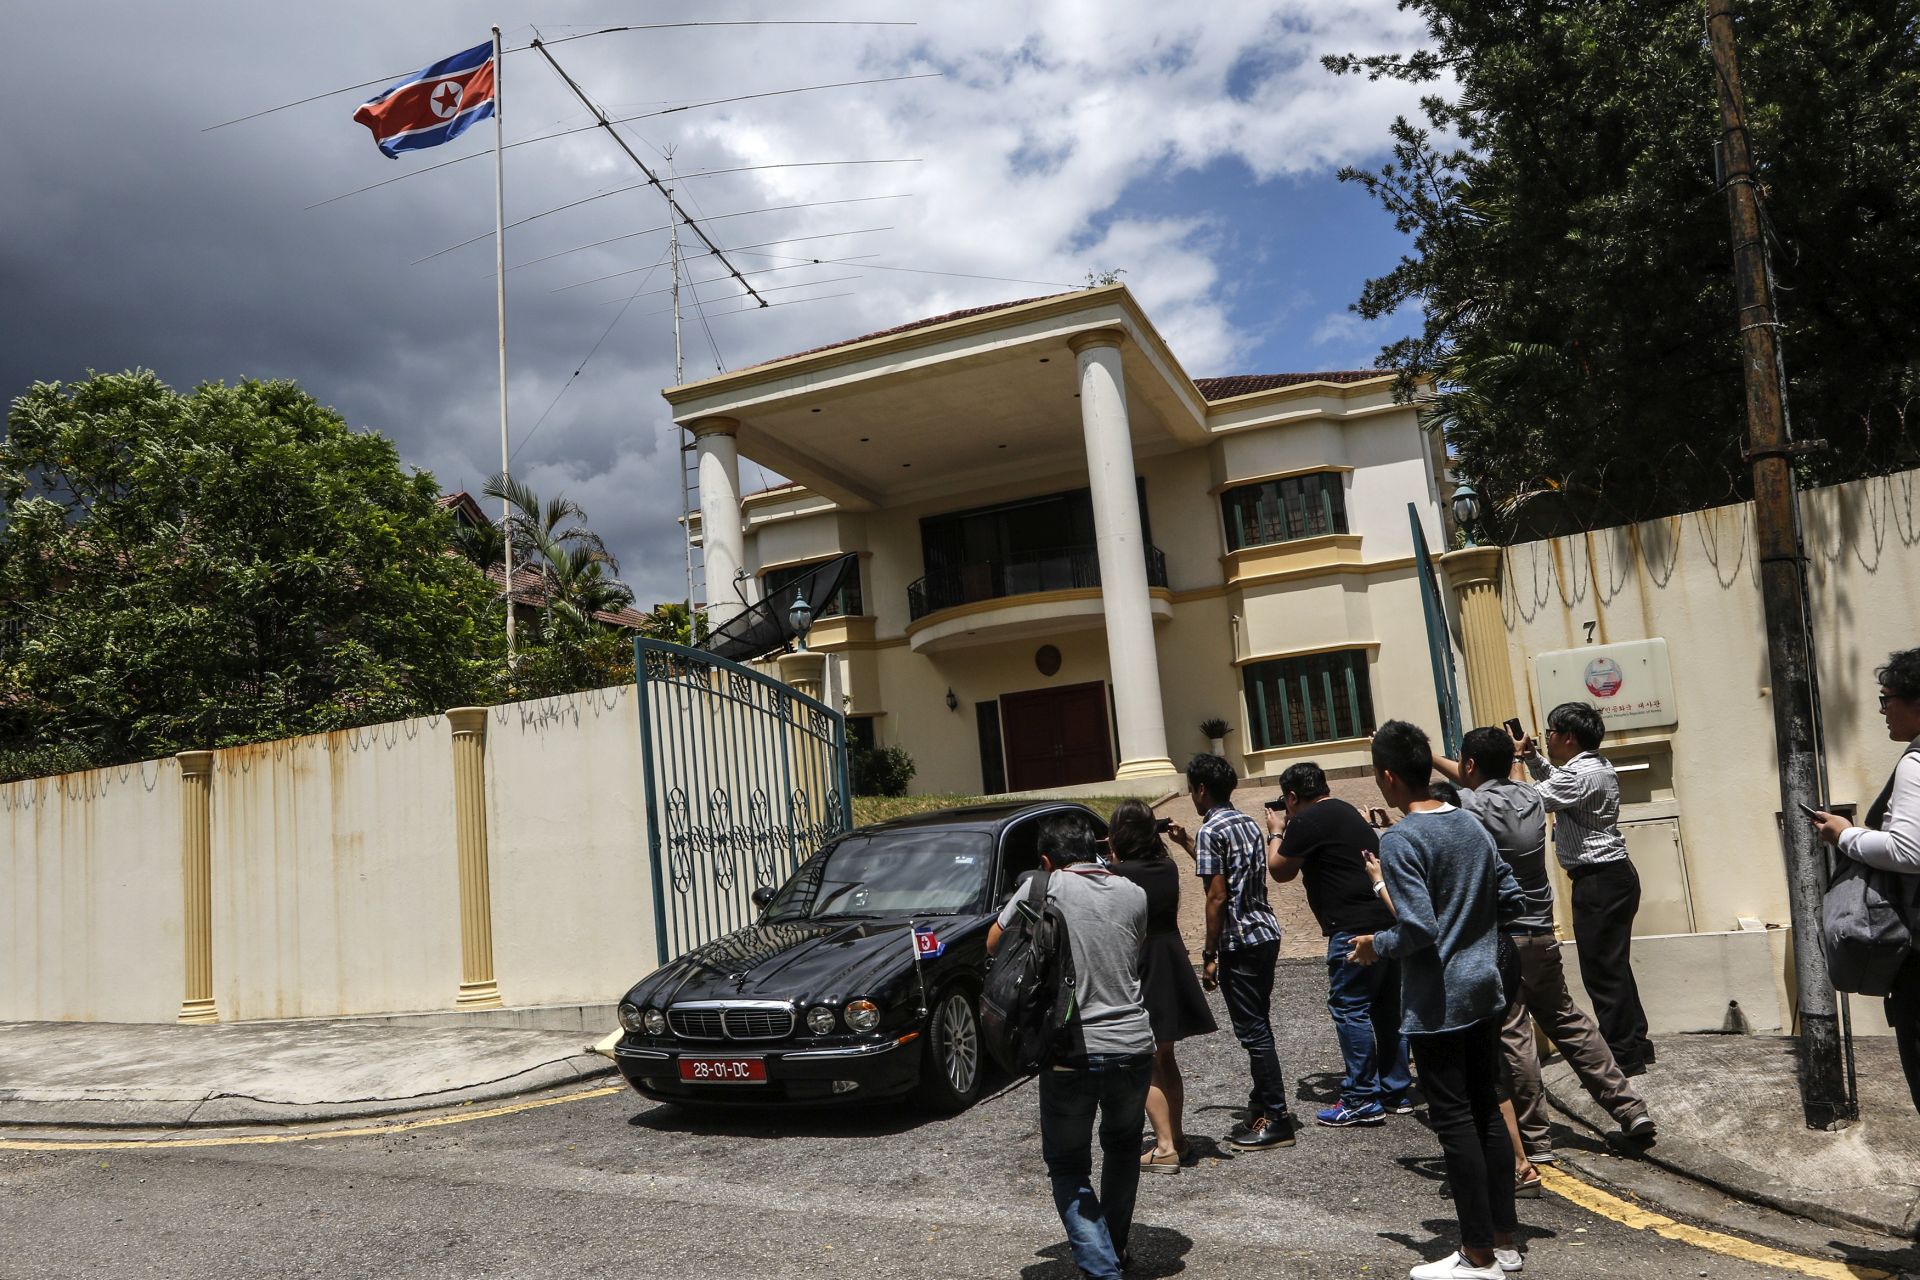 epa05794145 A diplomatic vehicle leaves the North Korean Embassy as members of the media crowd near the building's main entrance, in Kuala Lumpur, Malaysia, 15 February 2017. A press statement released by the Malaysian Royal Police on 14 February 2017, said a 46-year-old North Korean named Kim Chol died the previous day on his way to a hospital from a Malaysia International Airport service counter where he sought initial medical treatment. Reports said Kim Chol, an alias used by Kim Jong-nam, was attacked by two unidentified women with chemical sprays. The Malaysian police are conducting an investigation and a post-mortem examination is expected to be completed soon.  EPA/AHMAD YUSNI